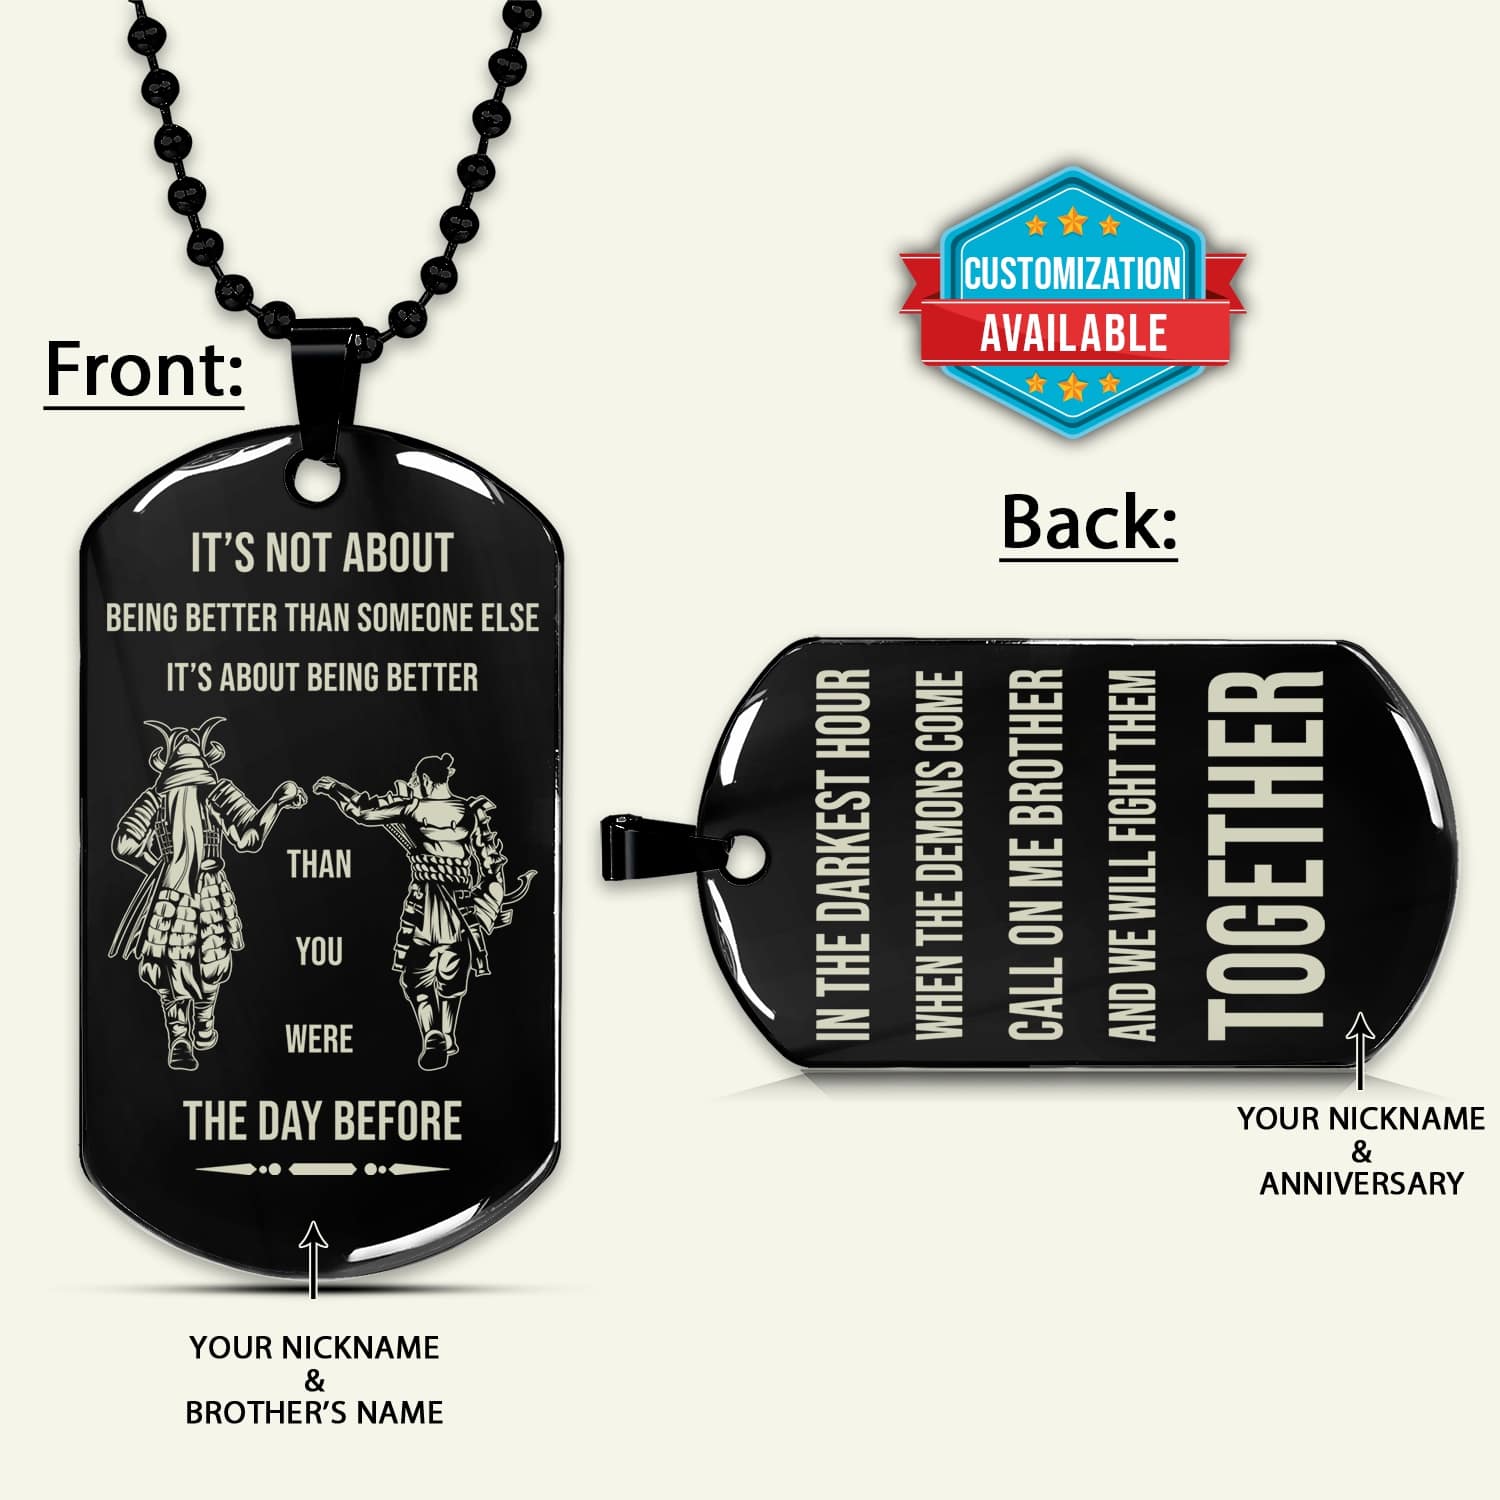 SAD061 - Call On Me Brother - It's About Being Better Than You Were The Day Before - Samurai - Bushido - Katana - Ronin - Miyamoto Musashi - Black Double-Sided Dog Tag